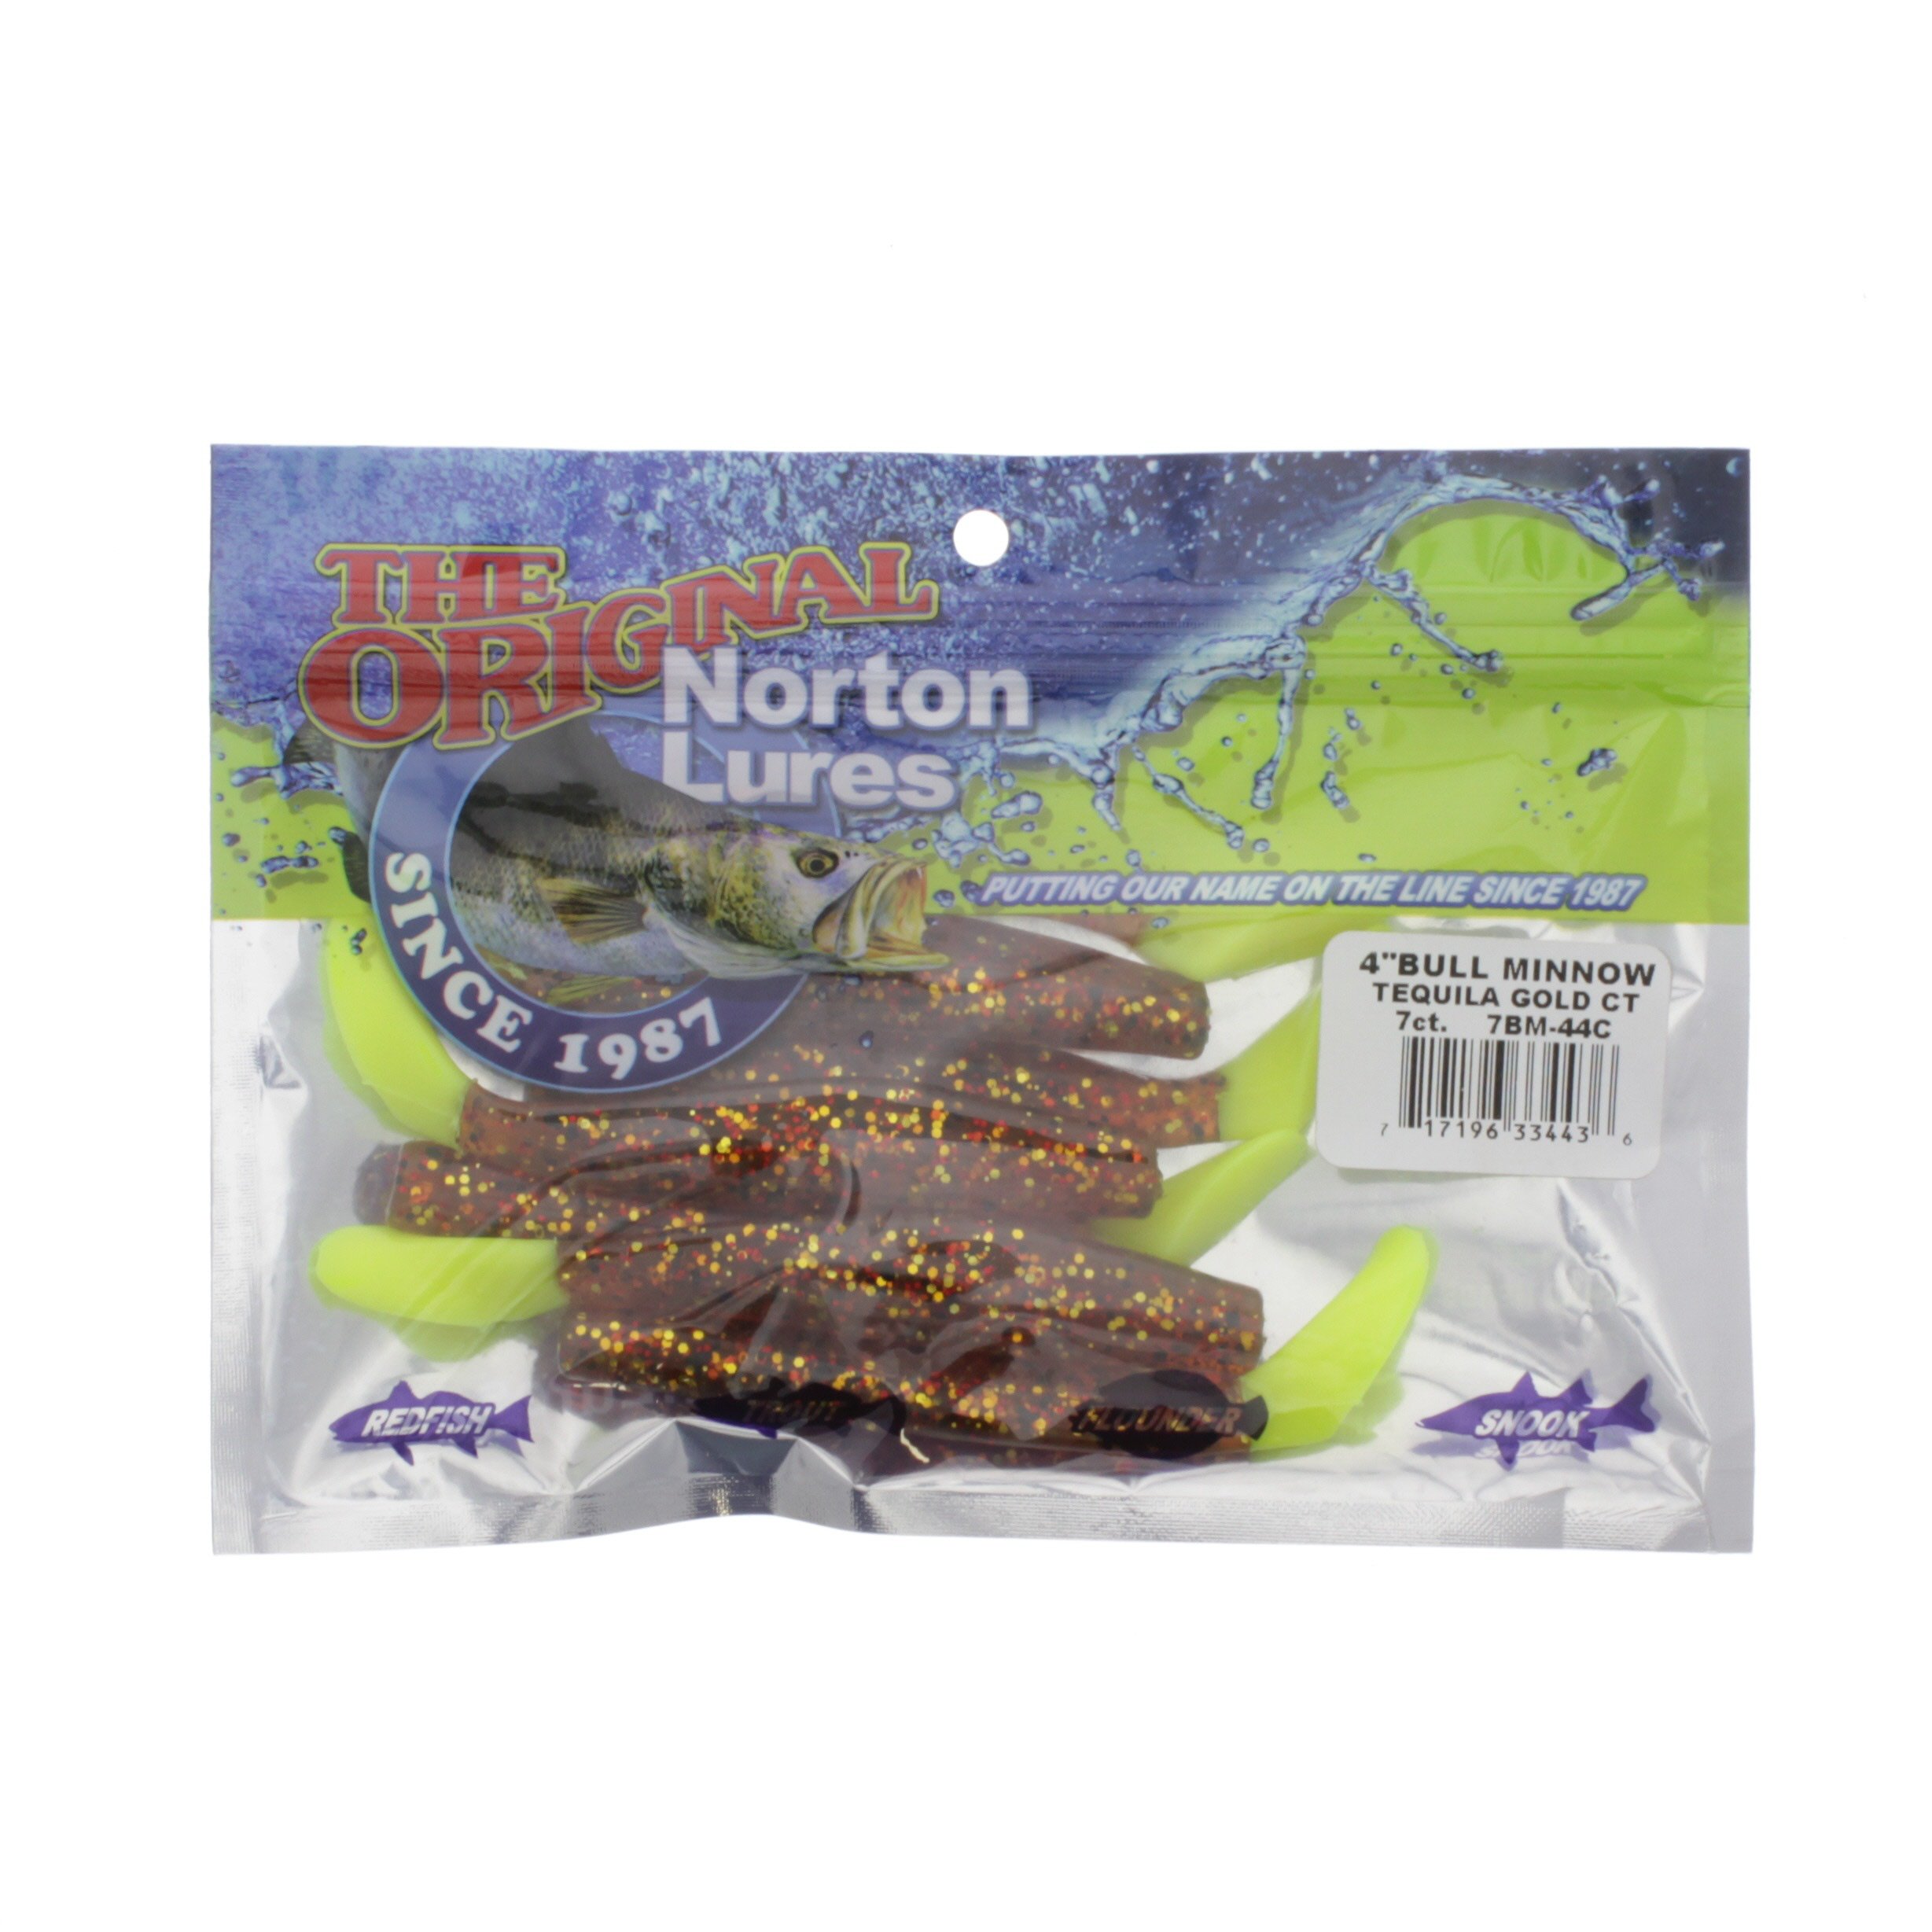 Norton Lures Tequila Gold 4 Bull Minnow - Shop Fishing at H-E-B